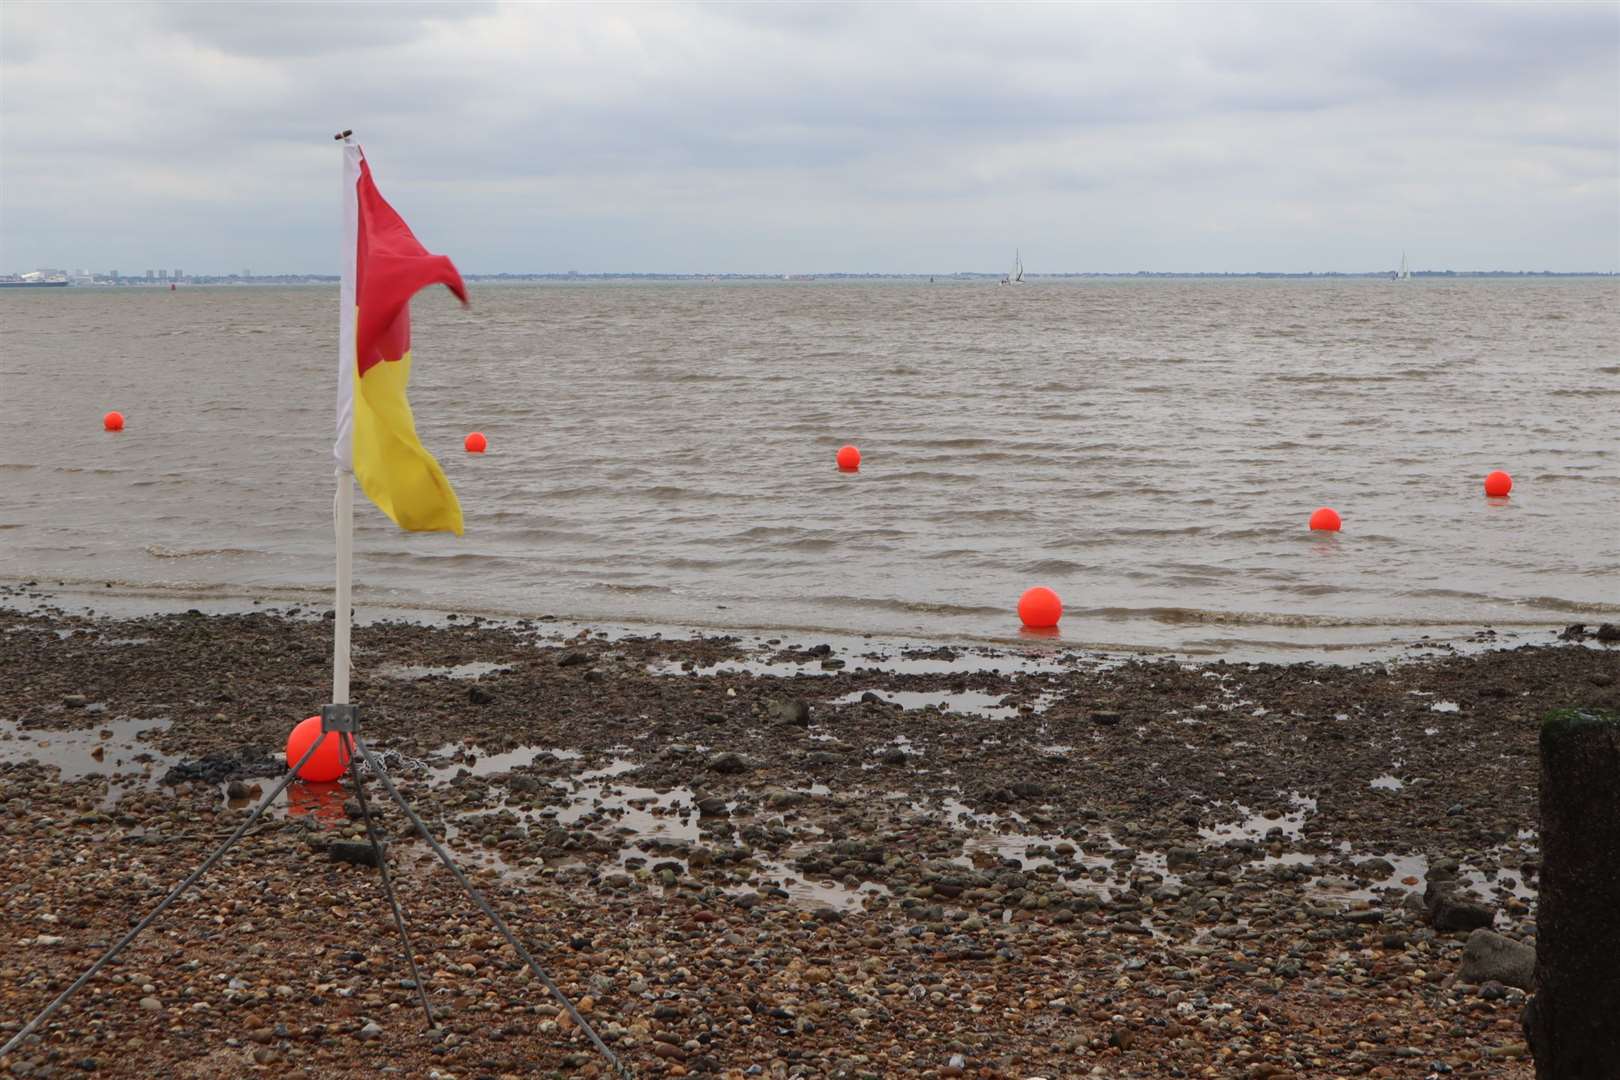 Sheerness Town Council has cleared a section of beach of rocks to make paddling easier and marked it with orange buoys